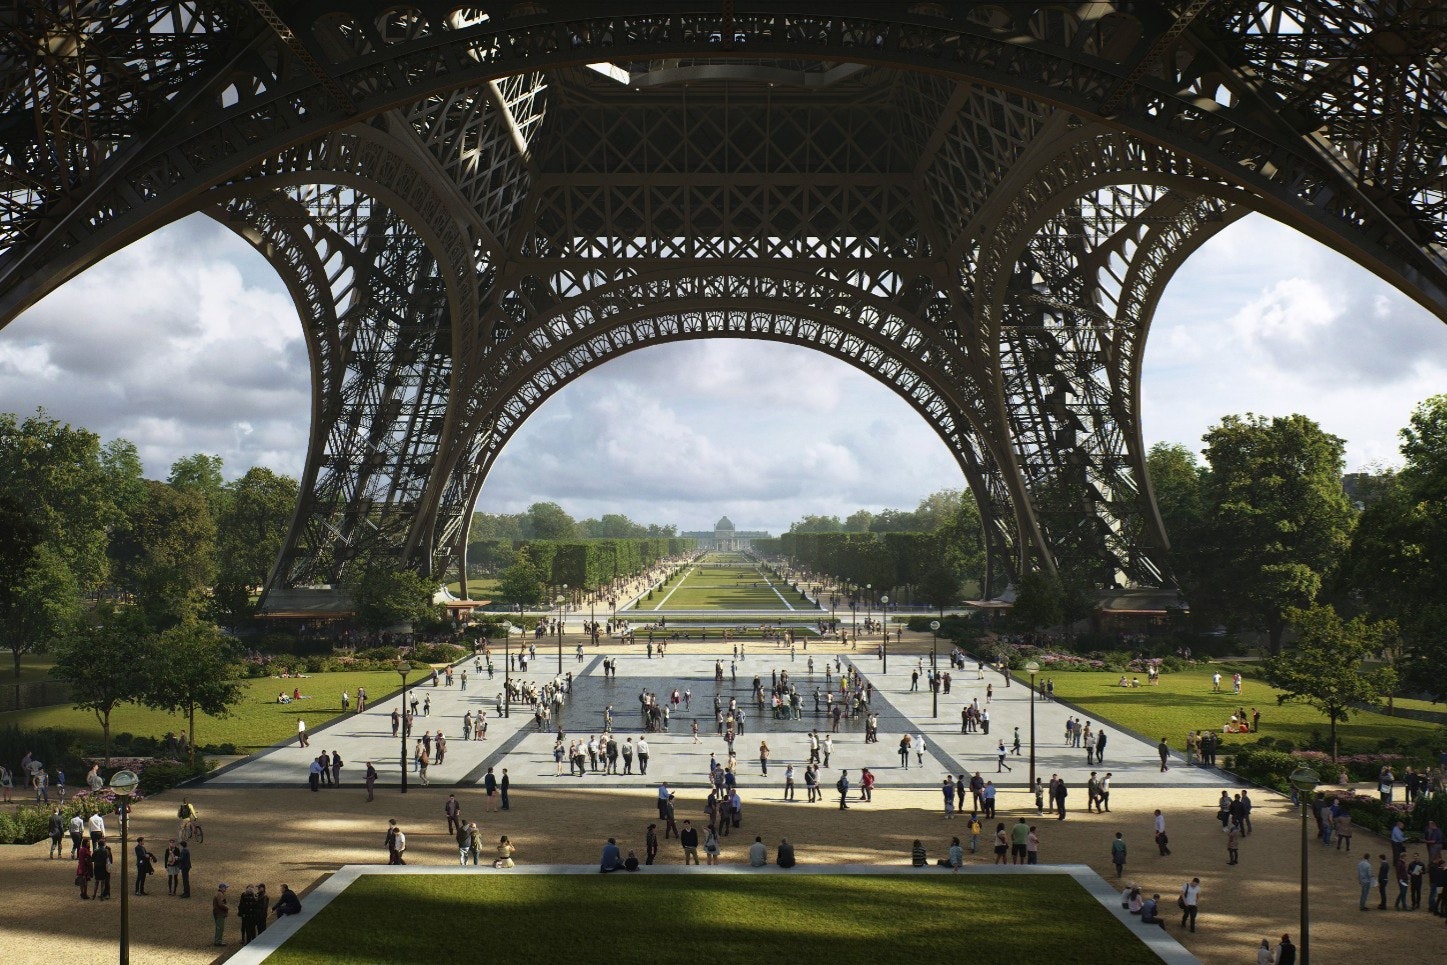 A rendering of the new redesign of the area around the Eiffel Tower.